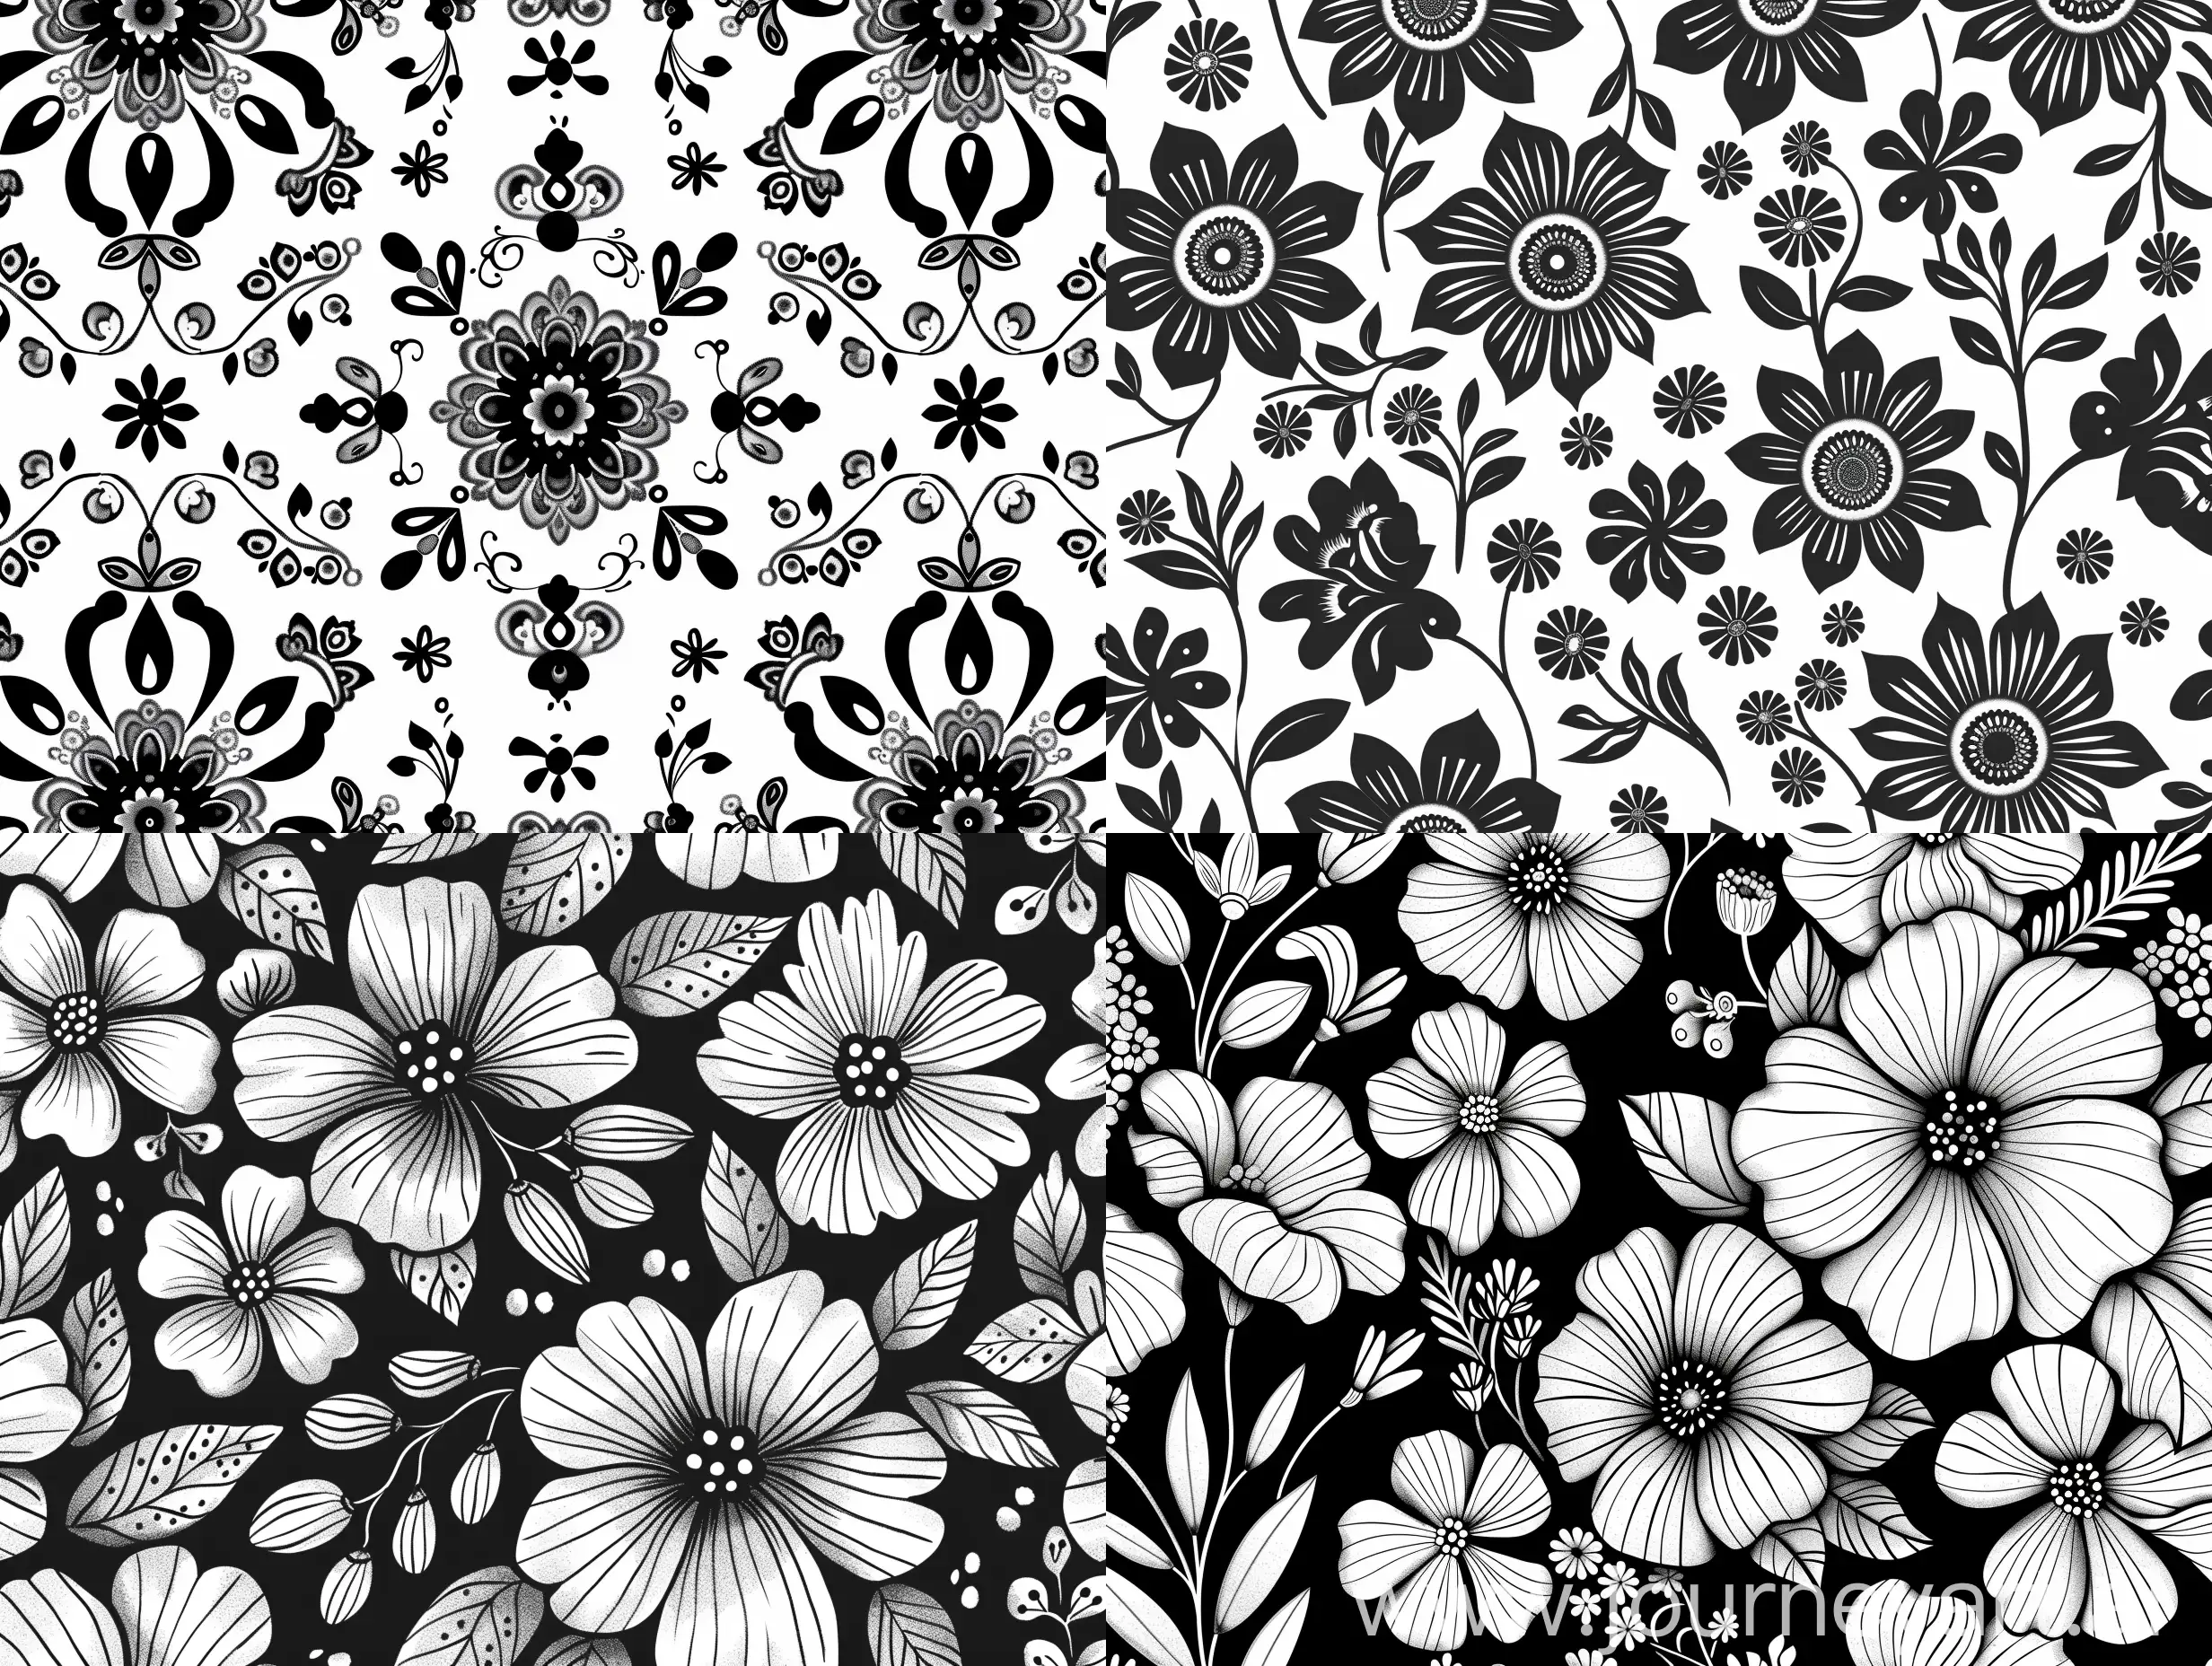 Elegant-Monochrome-Floral-Pattern-Delicate-Flowers-in-Black-and-White